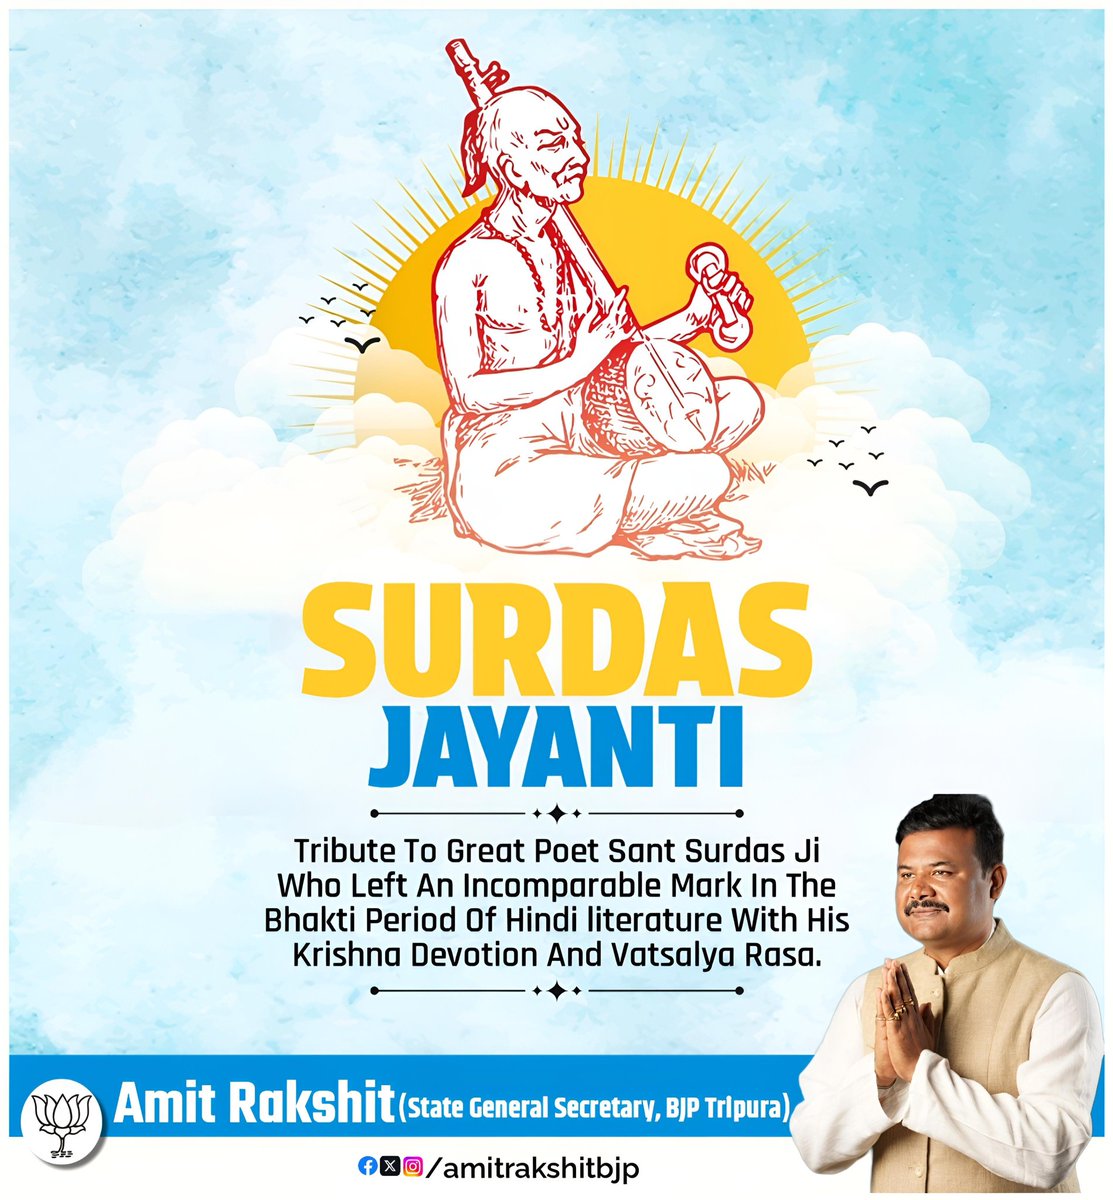 Honoring the birth anniversary of Surdas today, whose timeless compositions continue to inspire and resonate with hearts worldwide. Let's celebrate the legacy of this revered poet and musician! #SurdasJayanti